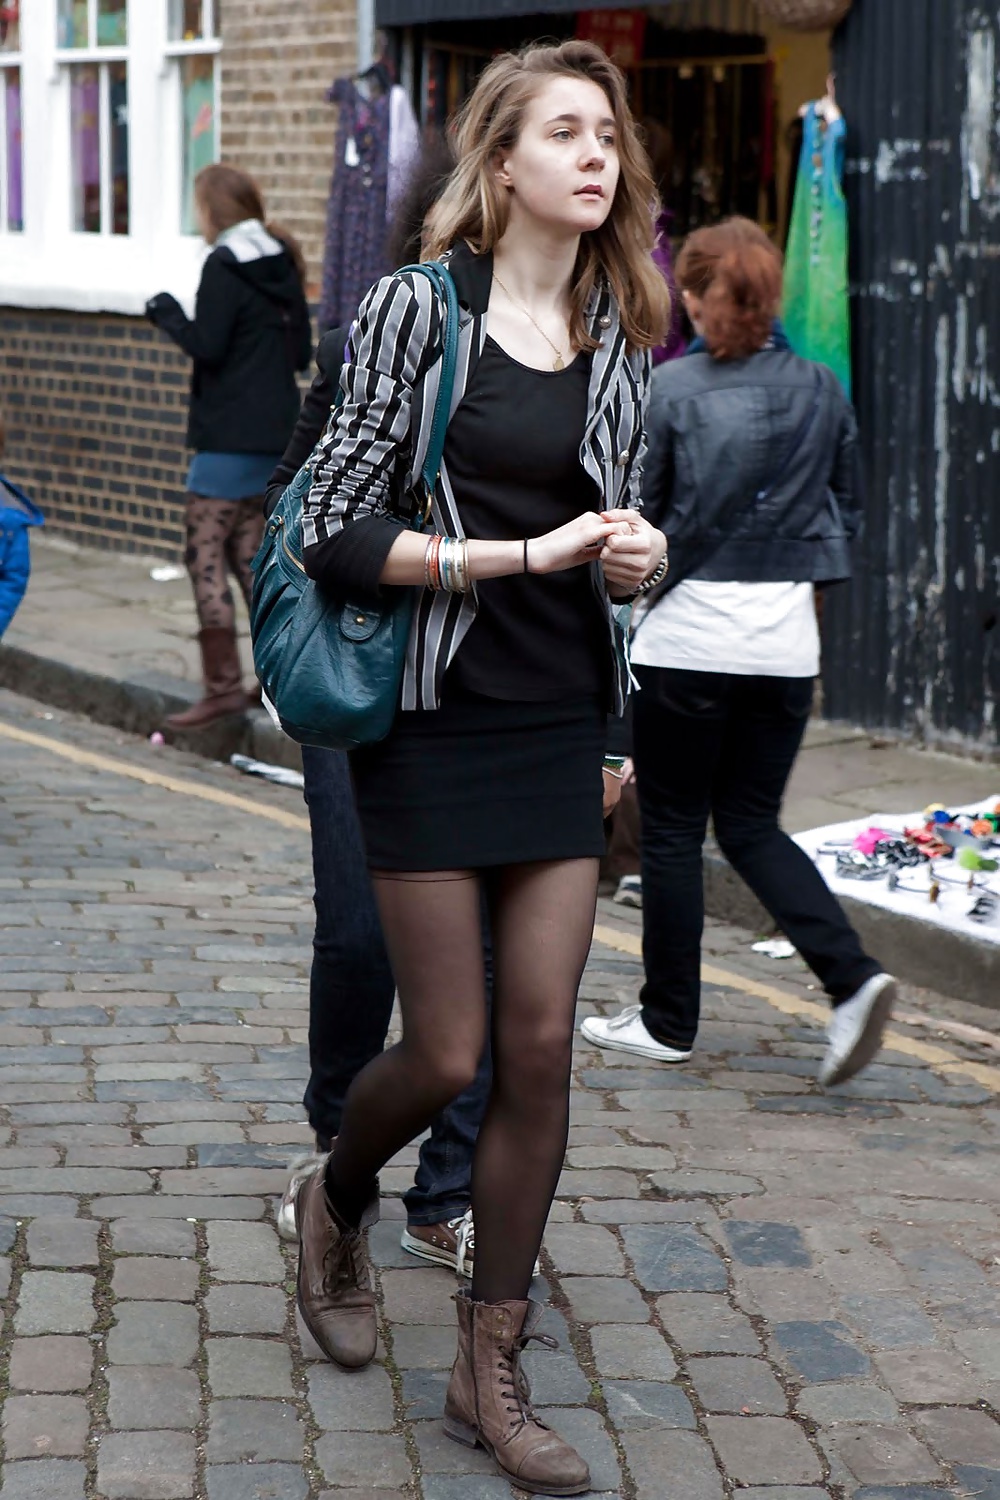 Free Candid young slut in the street III photos